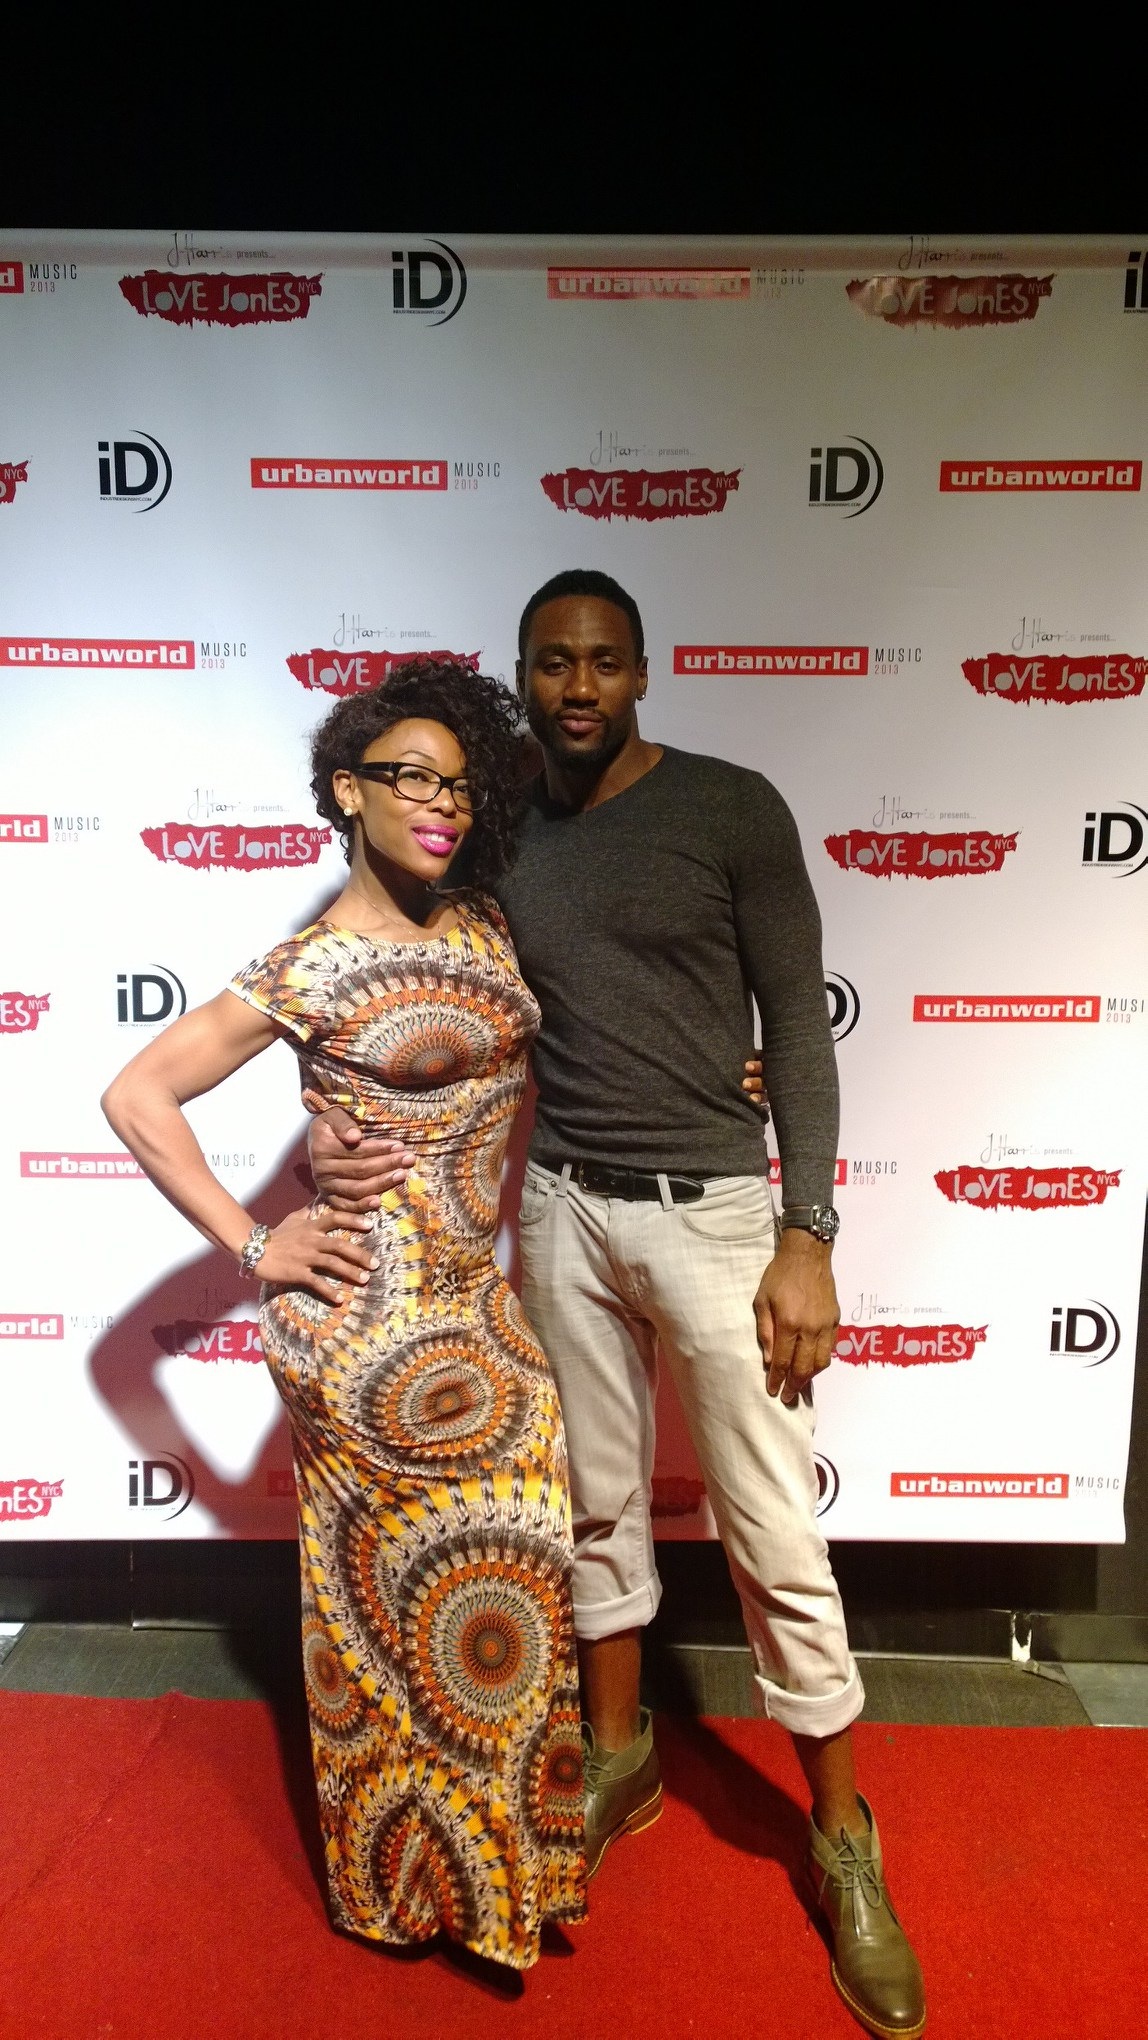 Manager PK Harris and Yarc Lewinson at urban film Fest. NYC 2013.